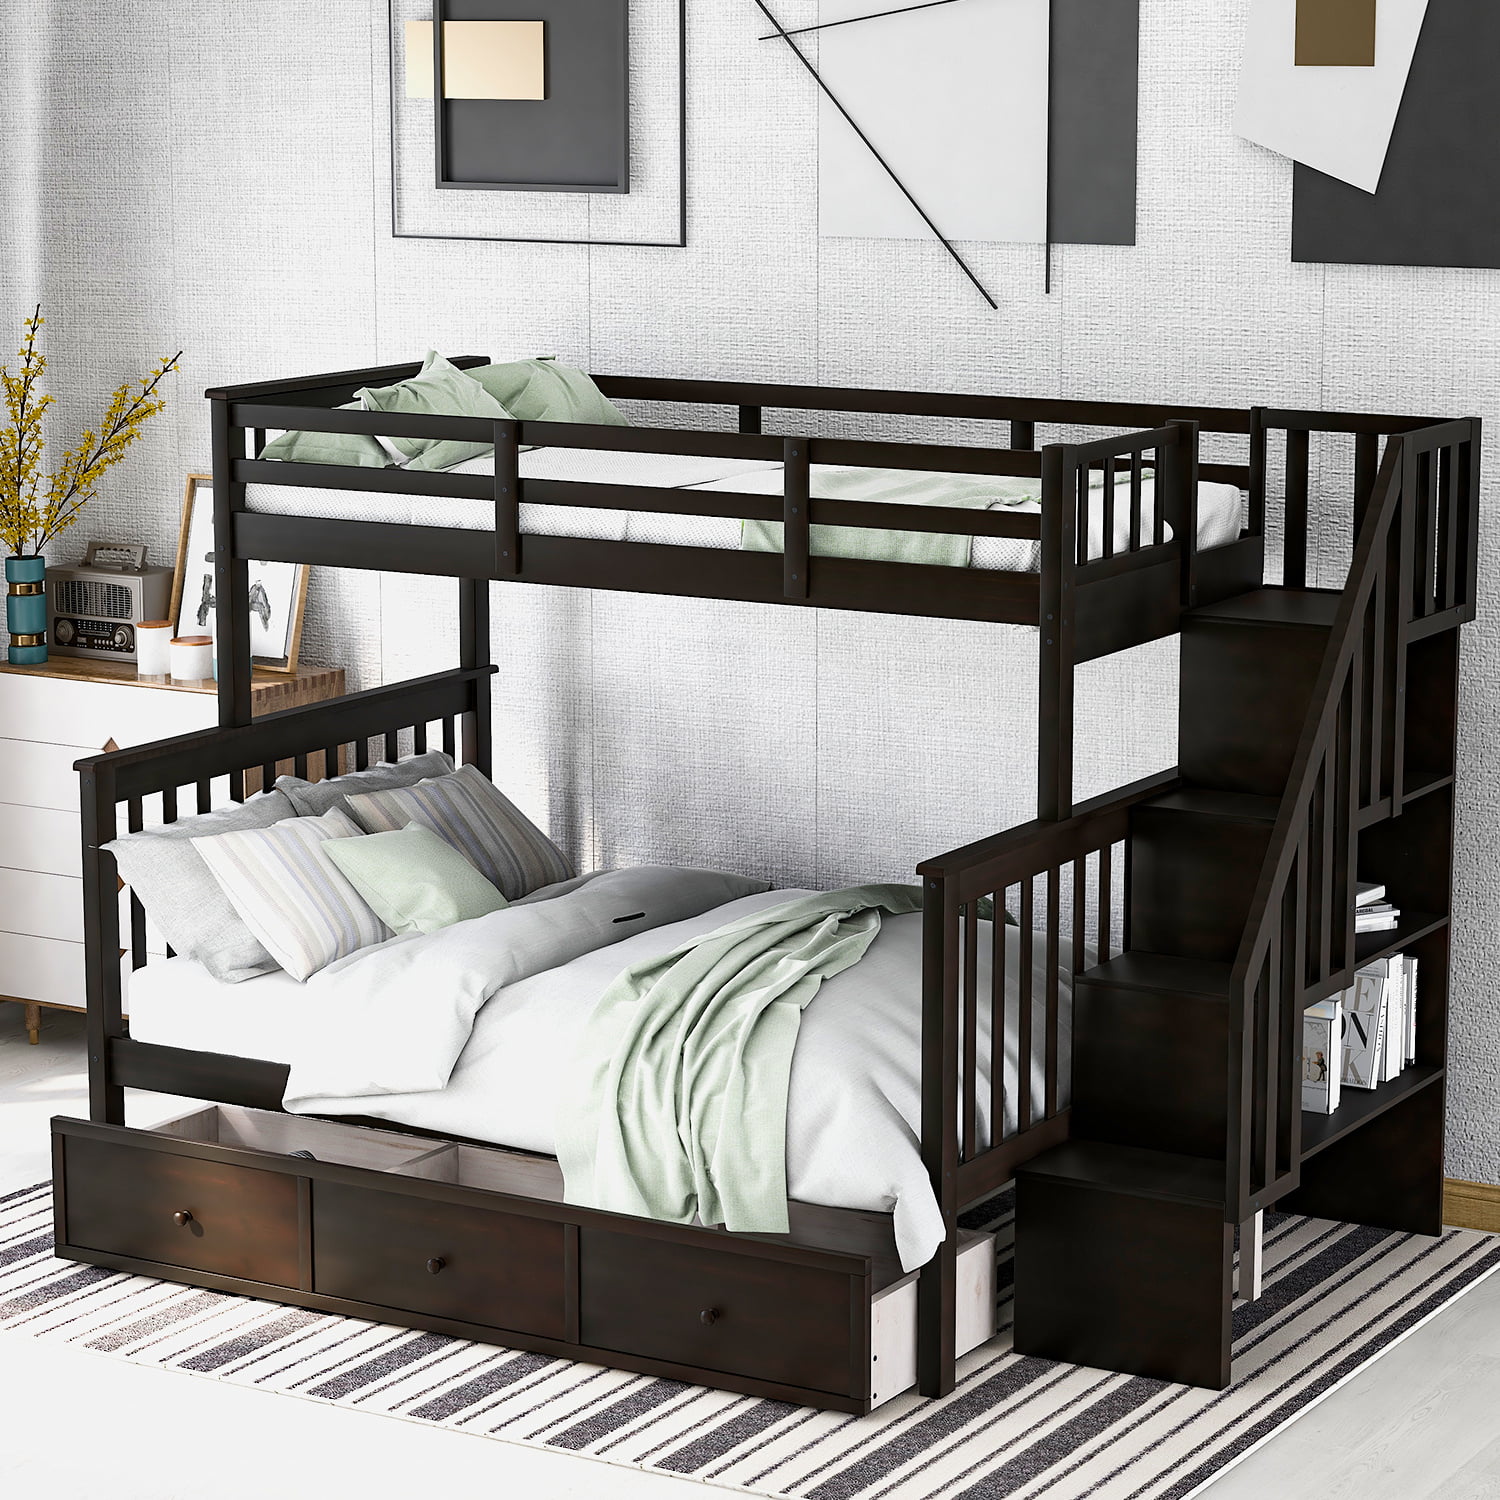 Solid Wood Full Bunk Beds, Full Size Bunk Bed Box Spring